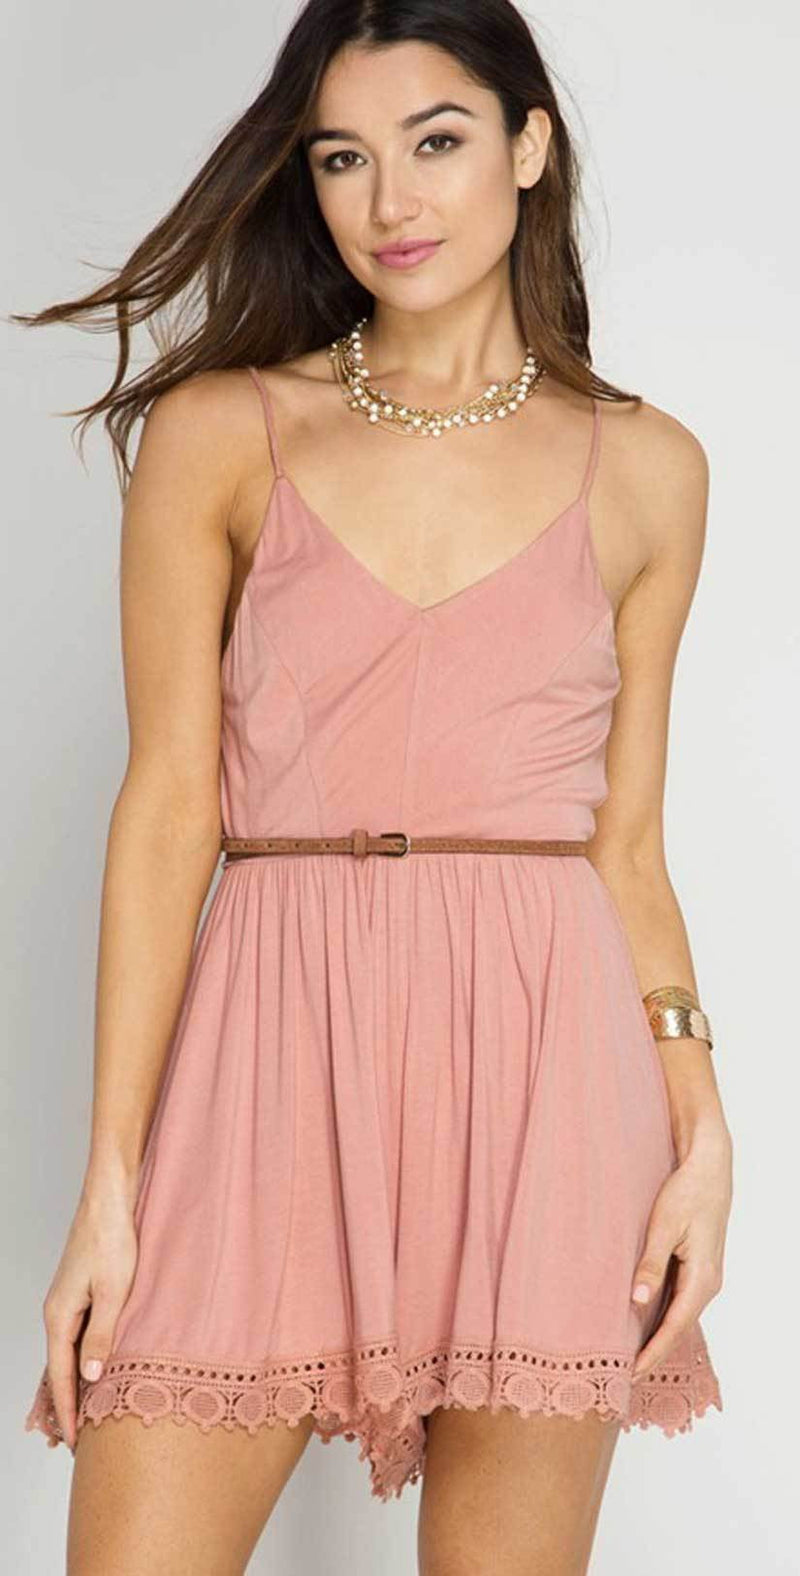 She + Sky Cami Romper With Lace Hem Line In Dusty Rose SL4120: